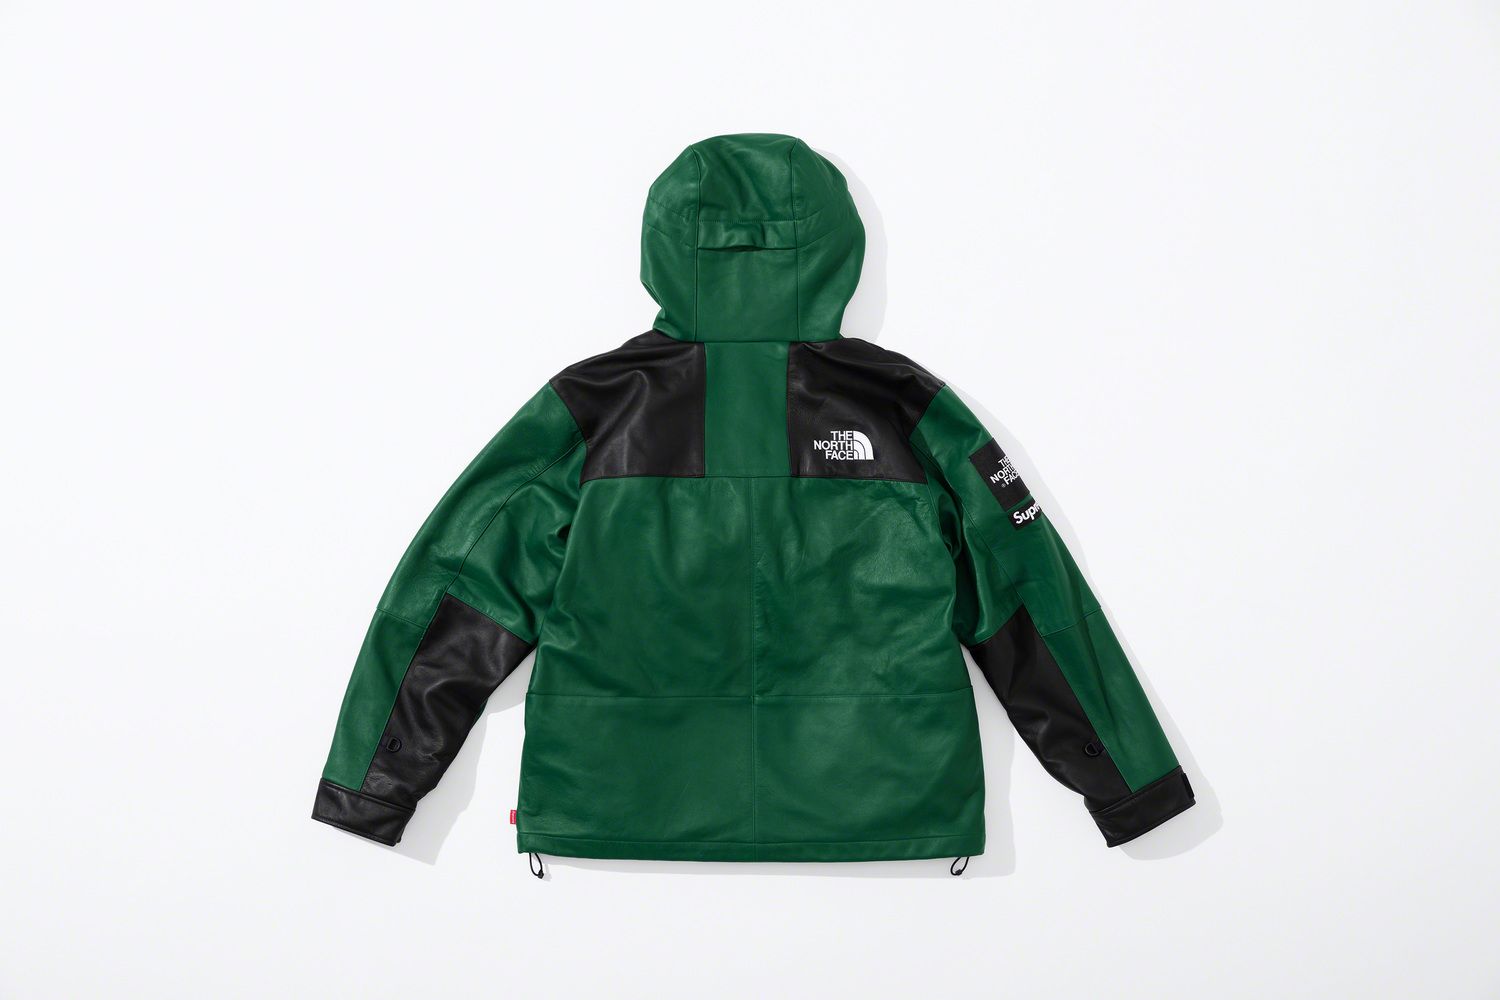 Supreme and The North Face Collaboration Brings Streetwear Vibe to 